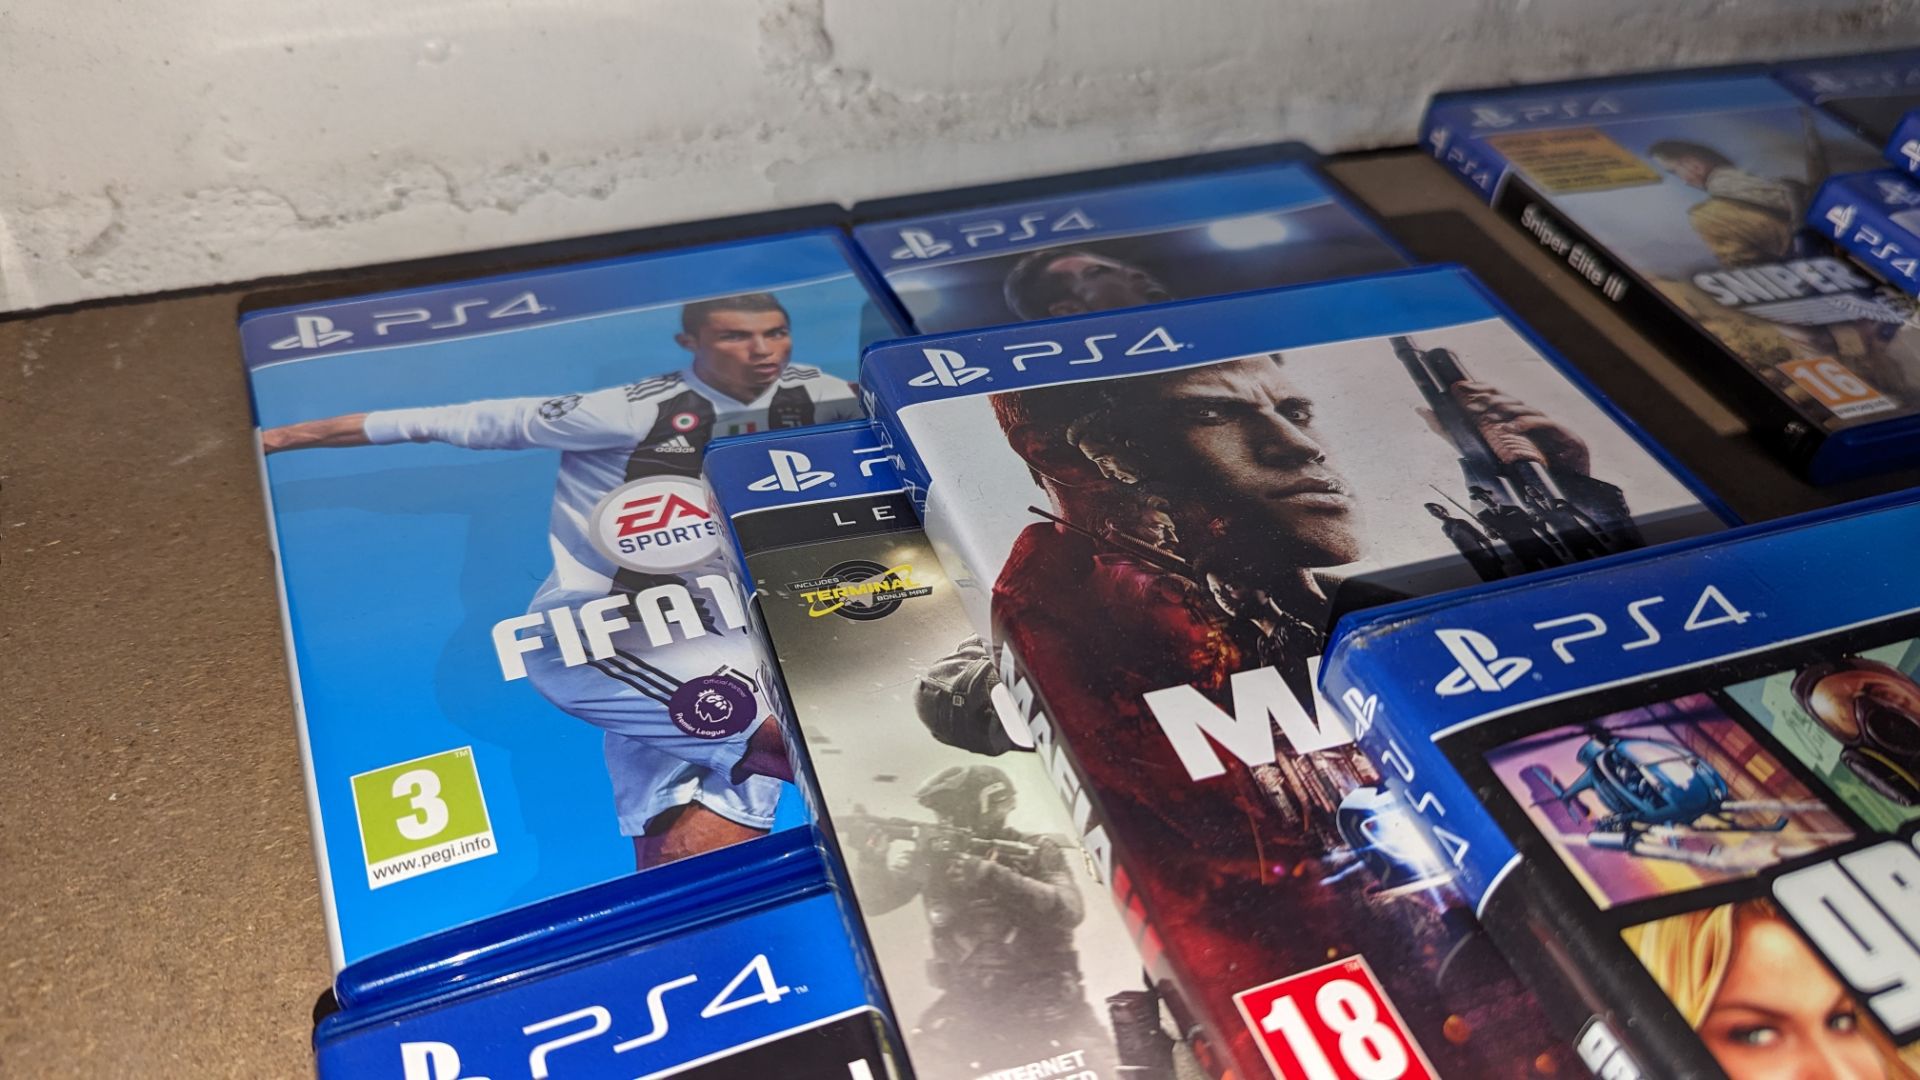 11 off boxed PS4 games as pictured - Image 6 of 10